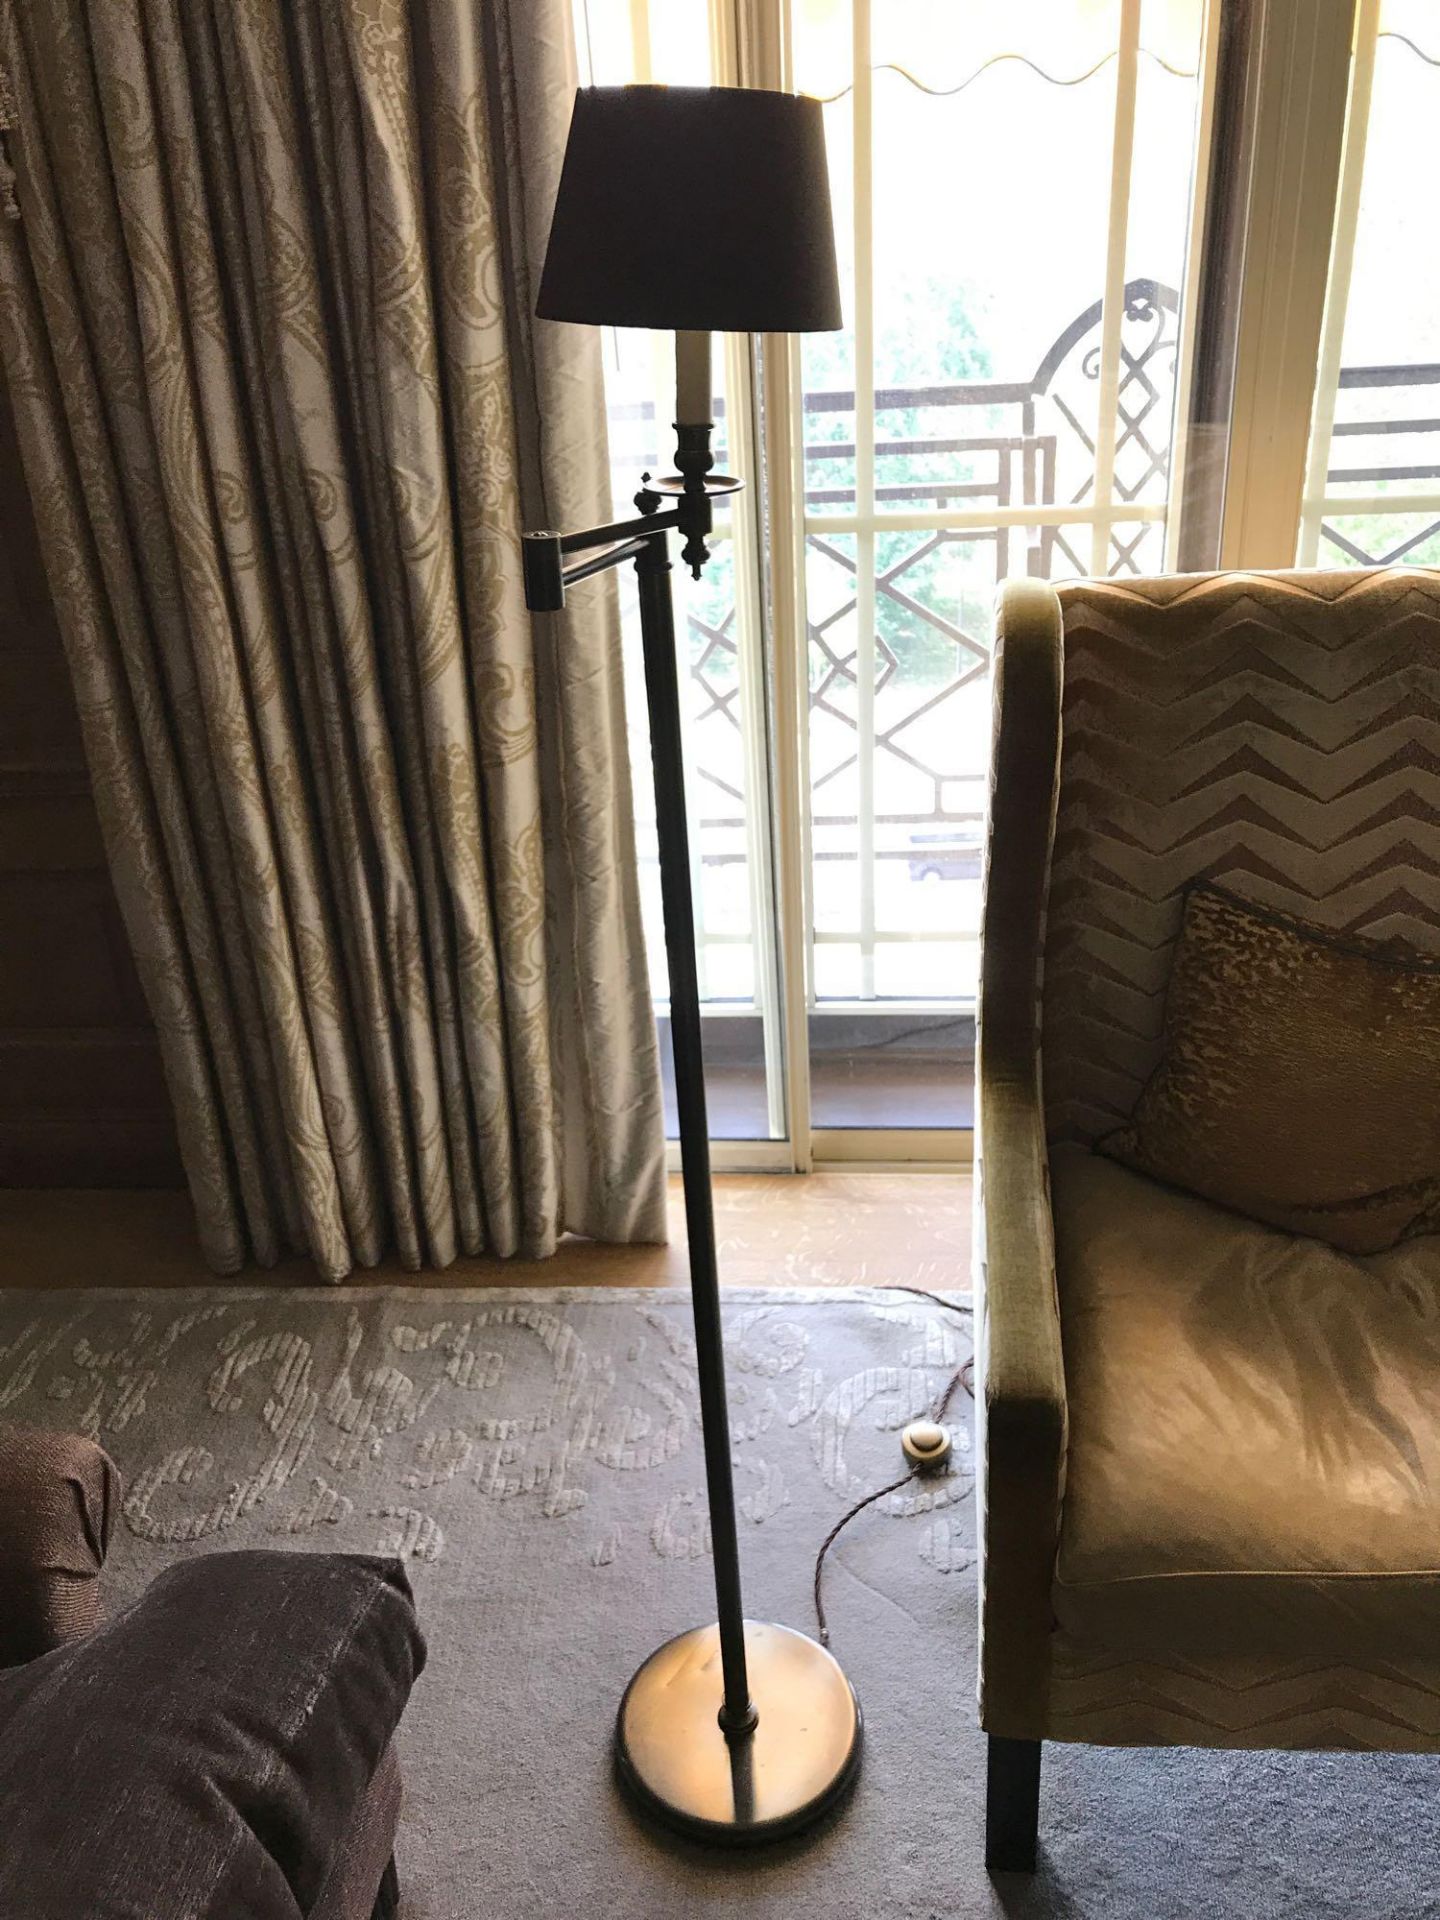 2 x Library Floor Lamp Finished In English Bronze Swing Arm Function With Shade 156cm Room 611 - Image 2 of 2